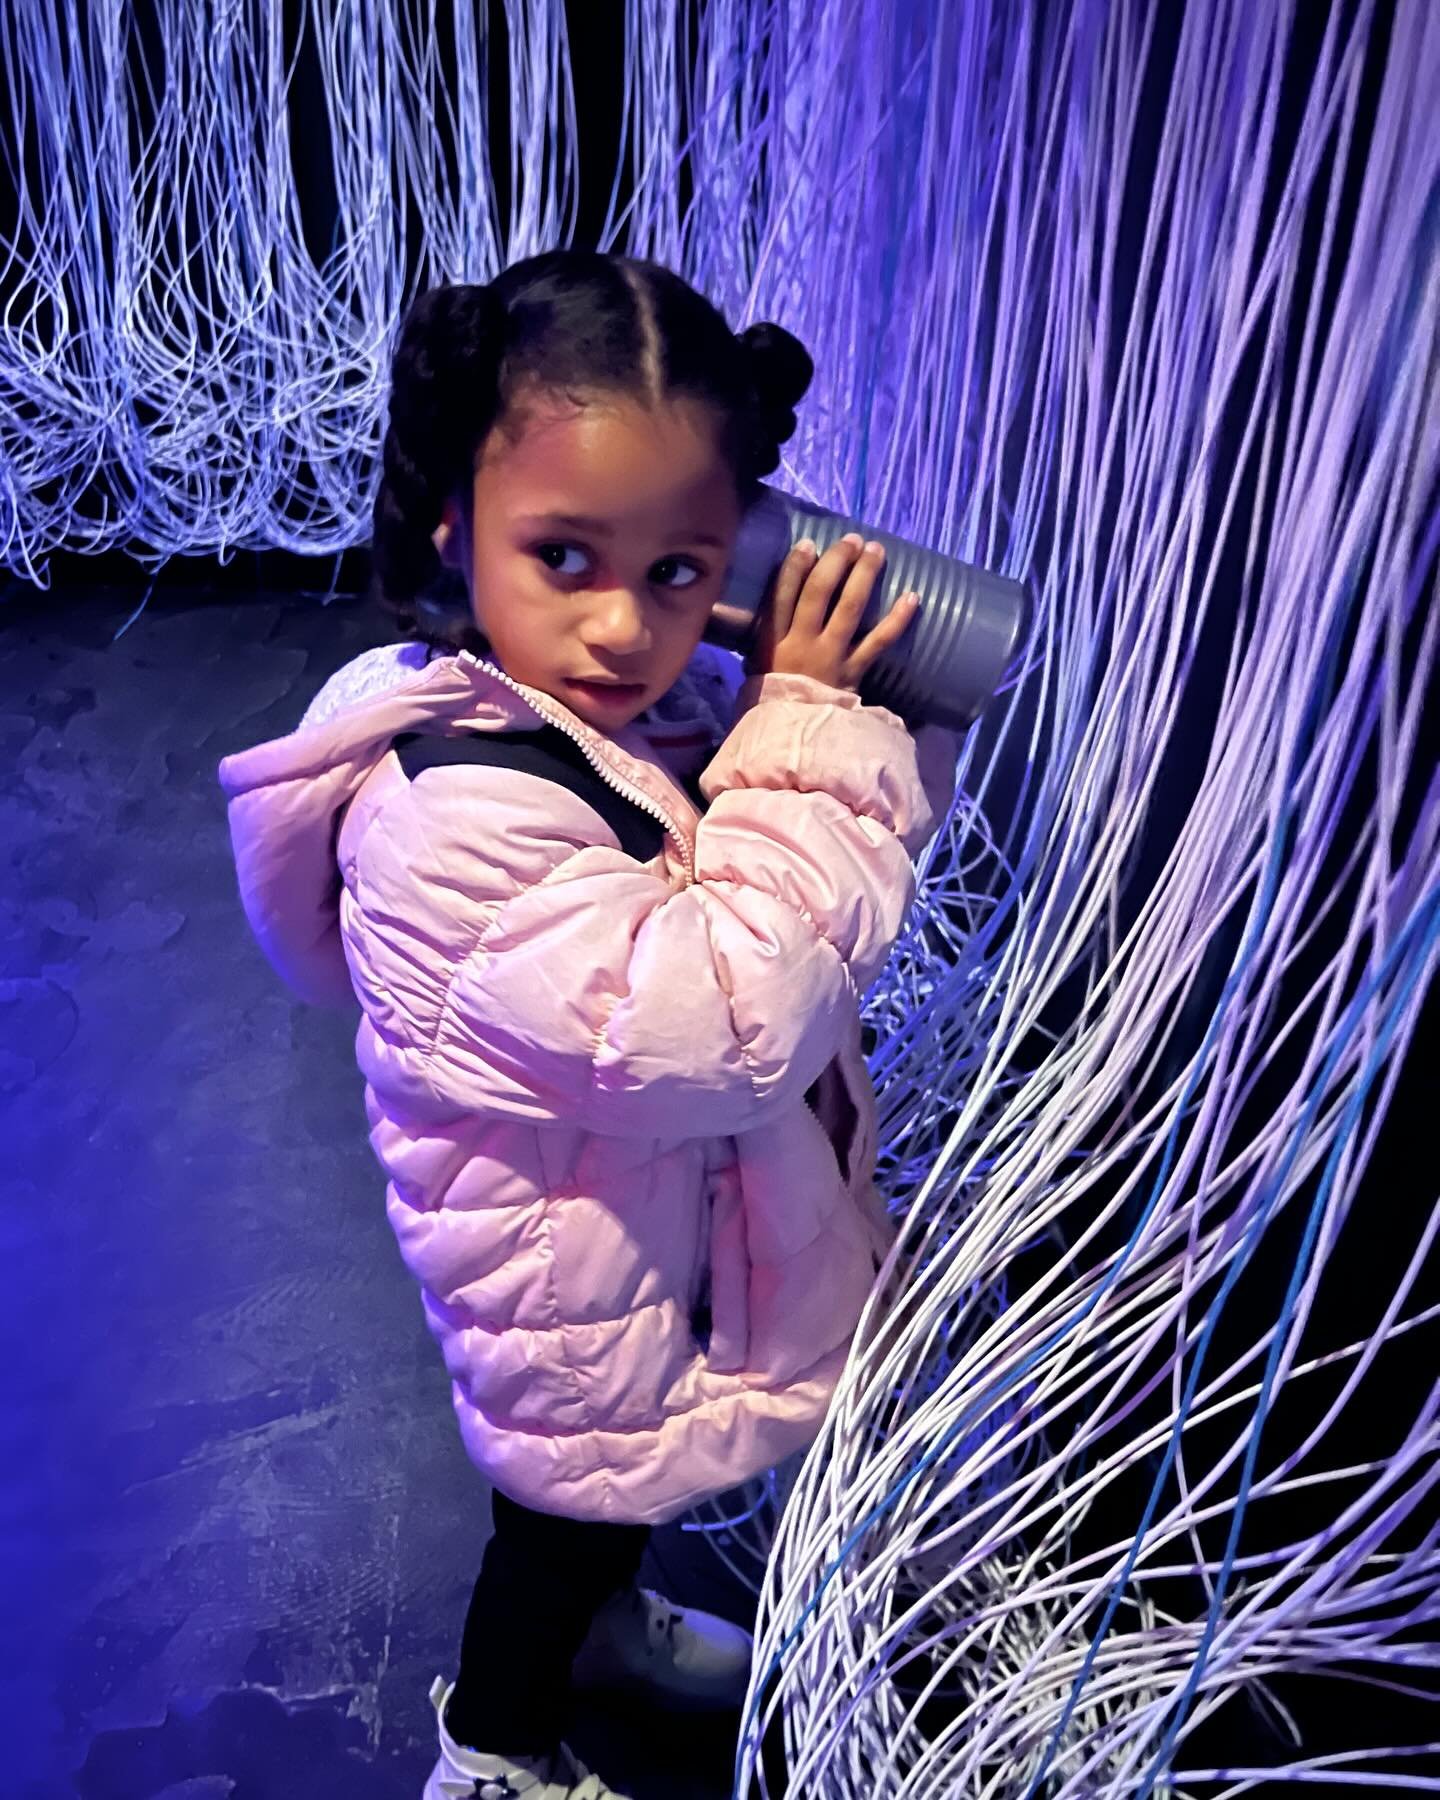 This weekend a few of our Boston chapter members went to the Wonder Museum and brought some the FBG Jr.&rsquo;s along! We got to experience some fun interactive STEAM exhibits and be kids with the kids again. Can&rsquo;t wait until our next #fbgbosch